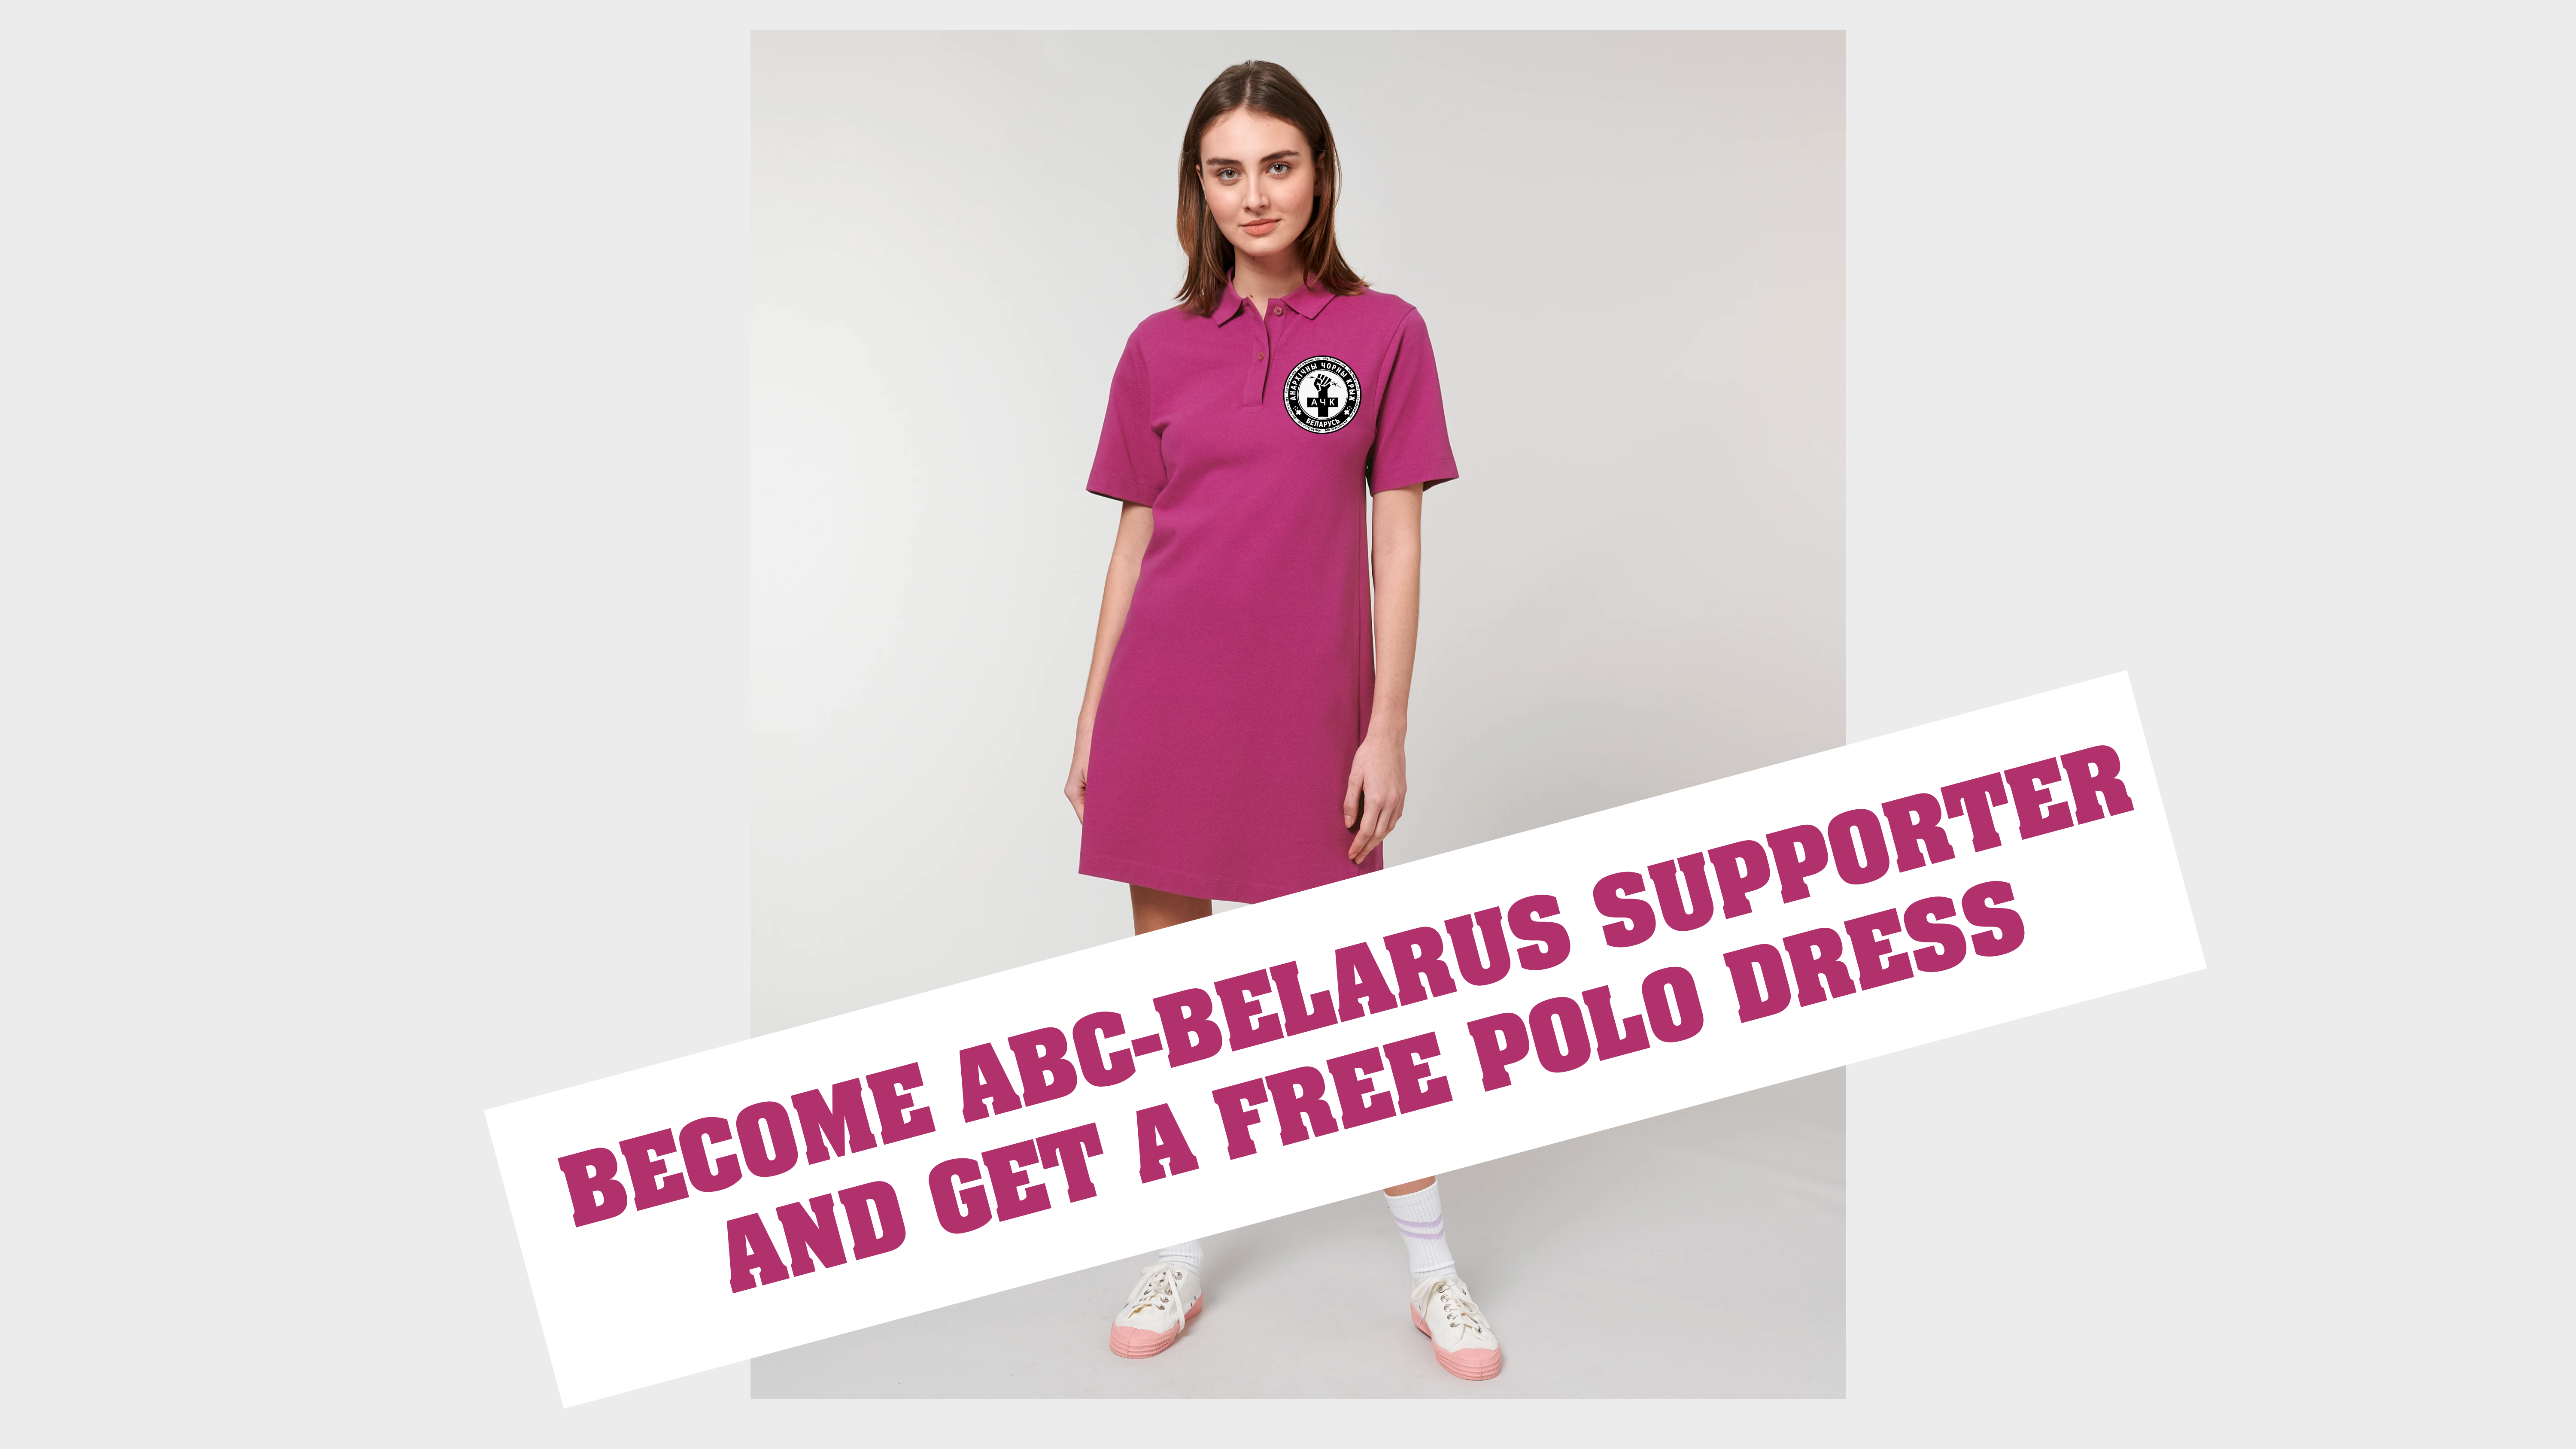 Start supporting ABC-Belarus on a permanent basis and get a polo-dress